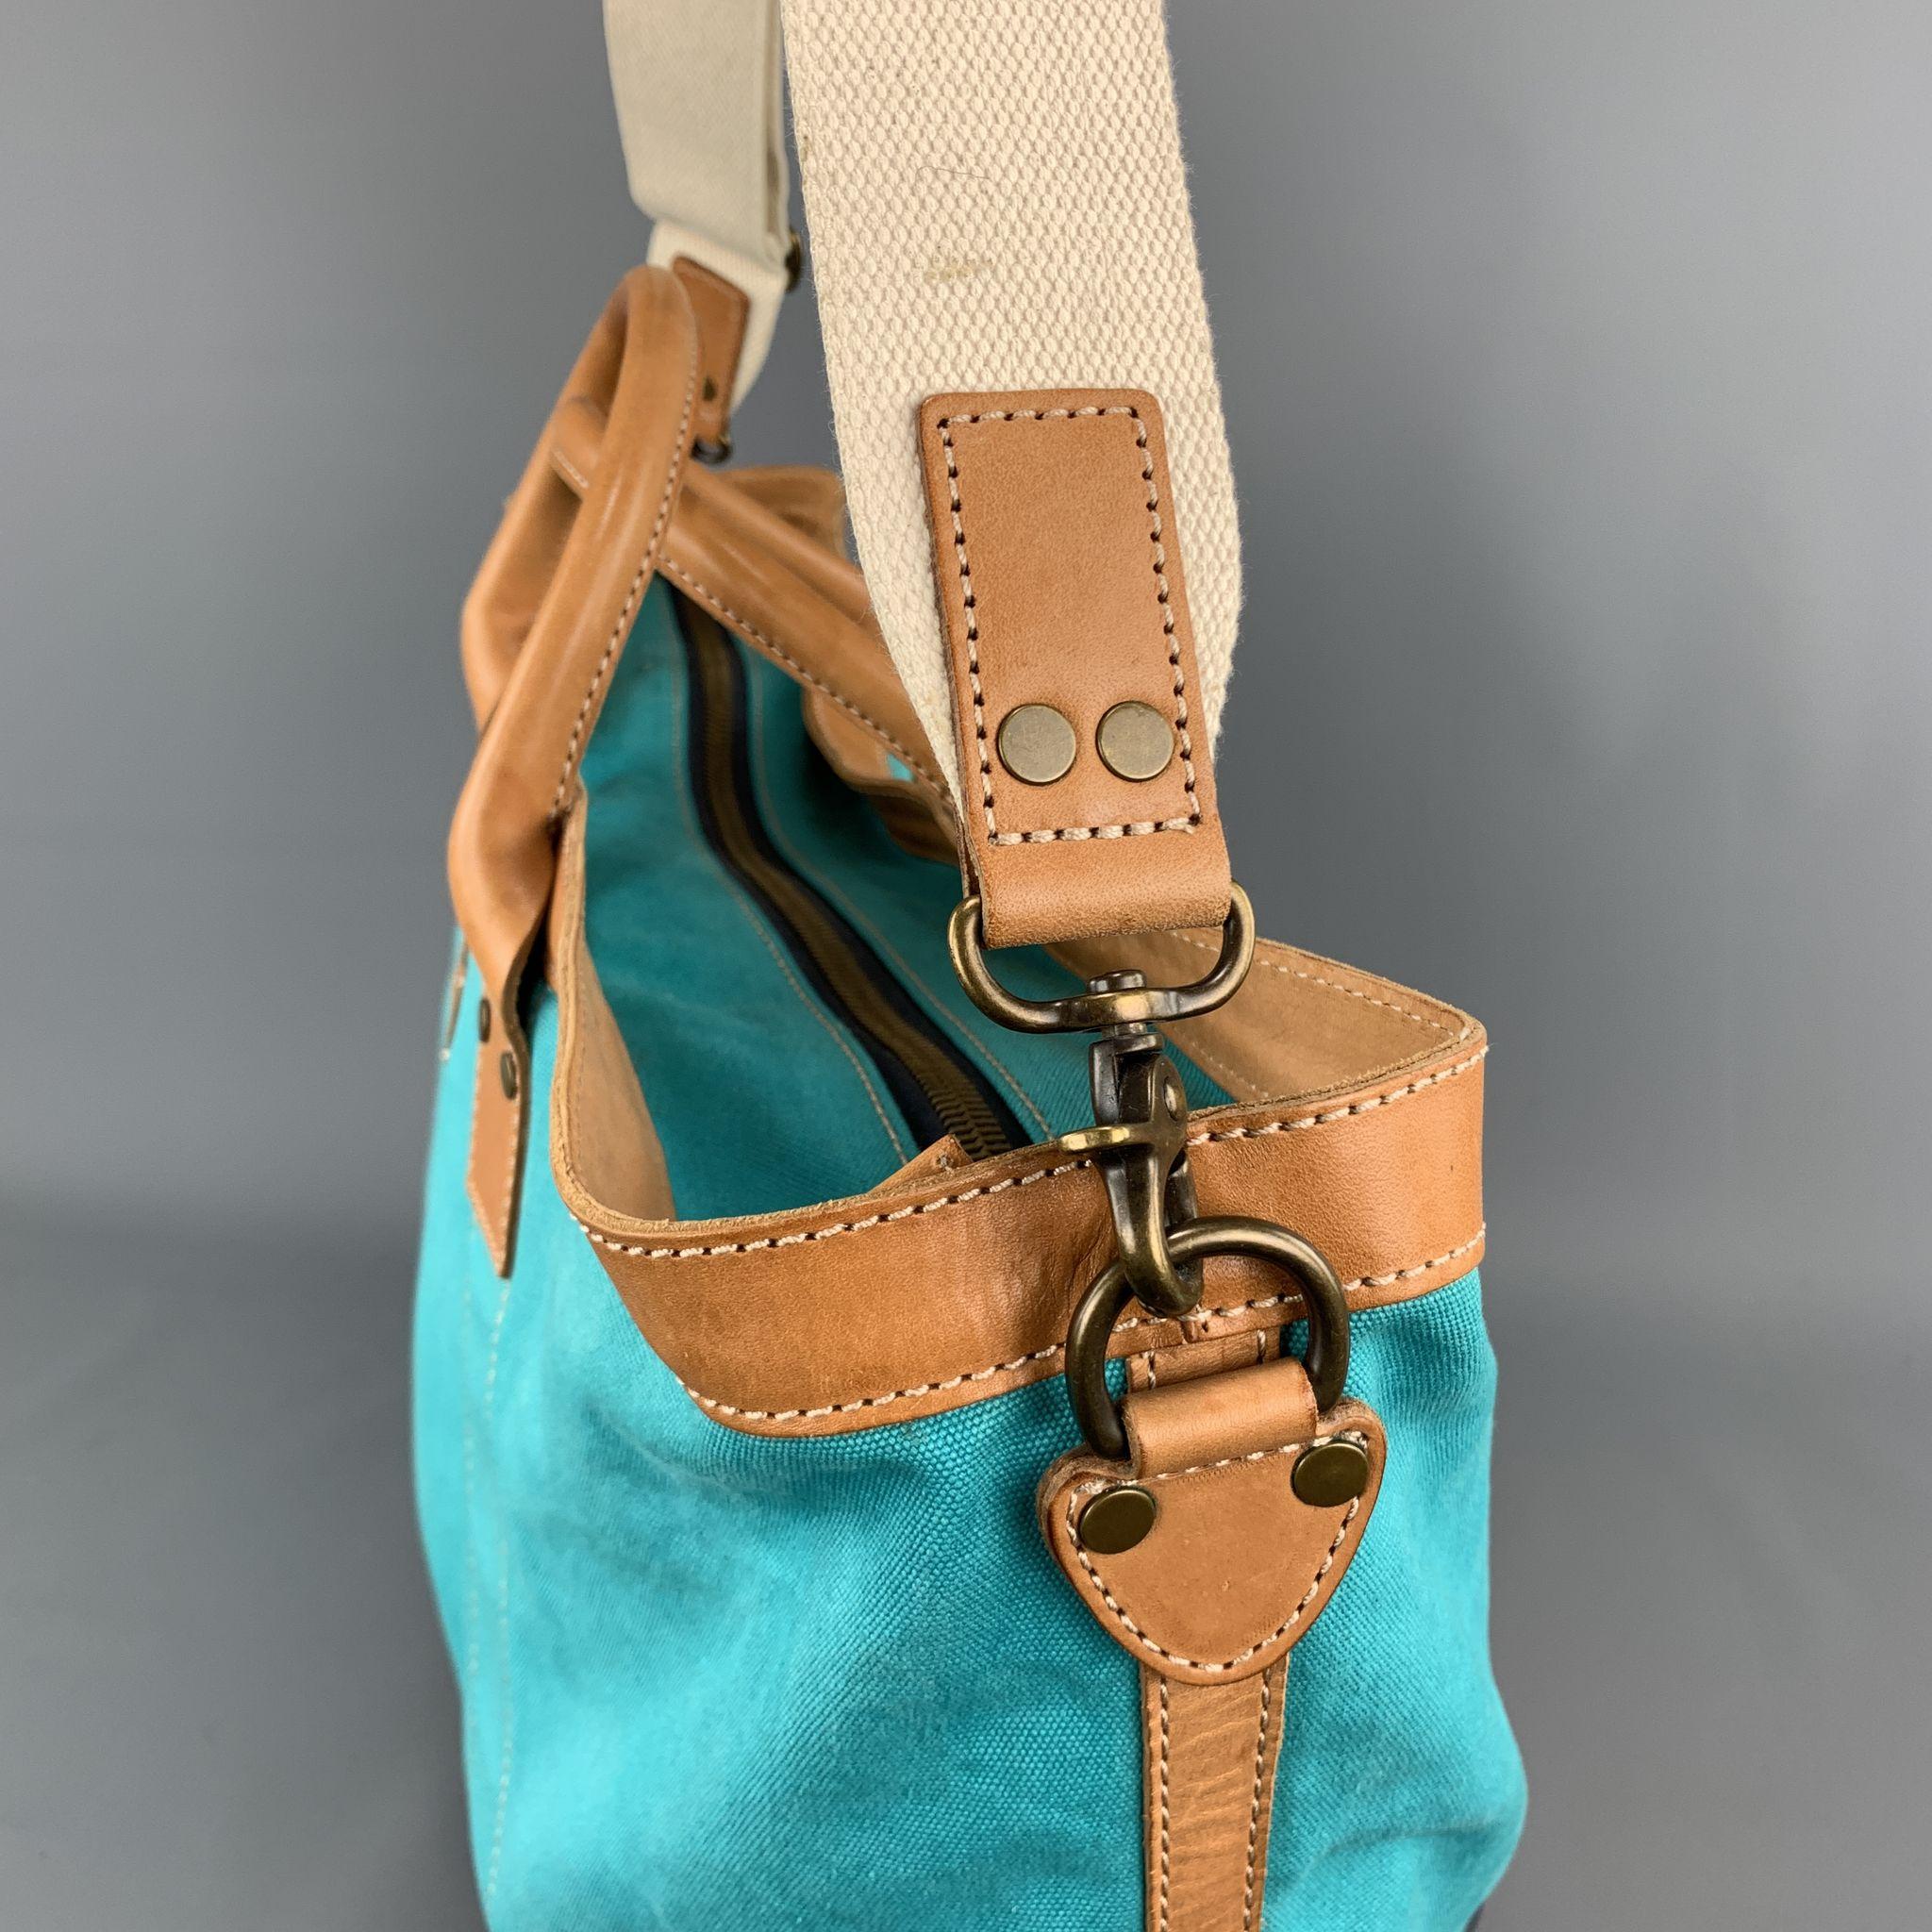 COLE HAAN Aqua & Navy Canvas Leather Two Tone Tote Bag 2